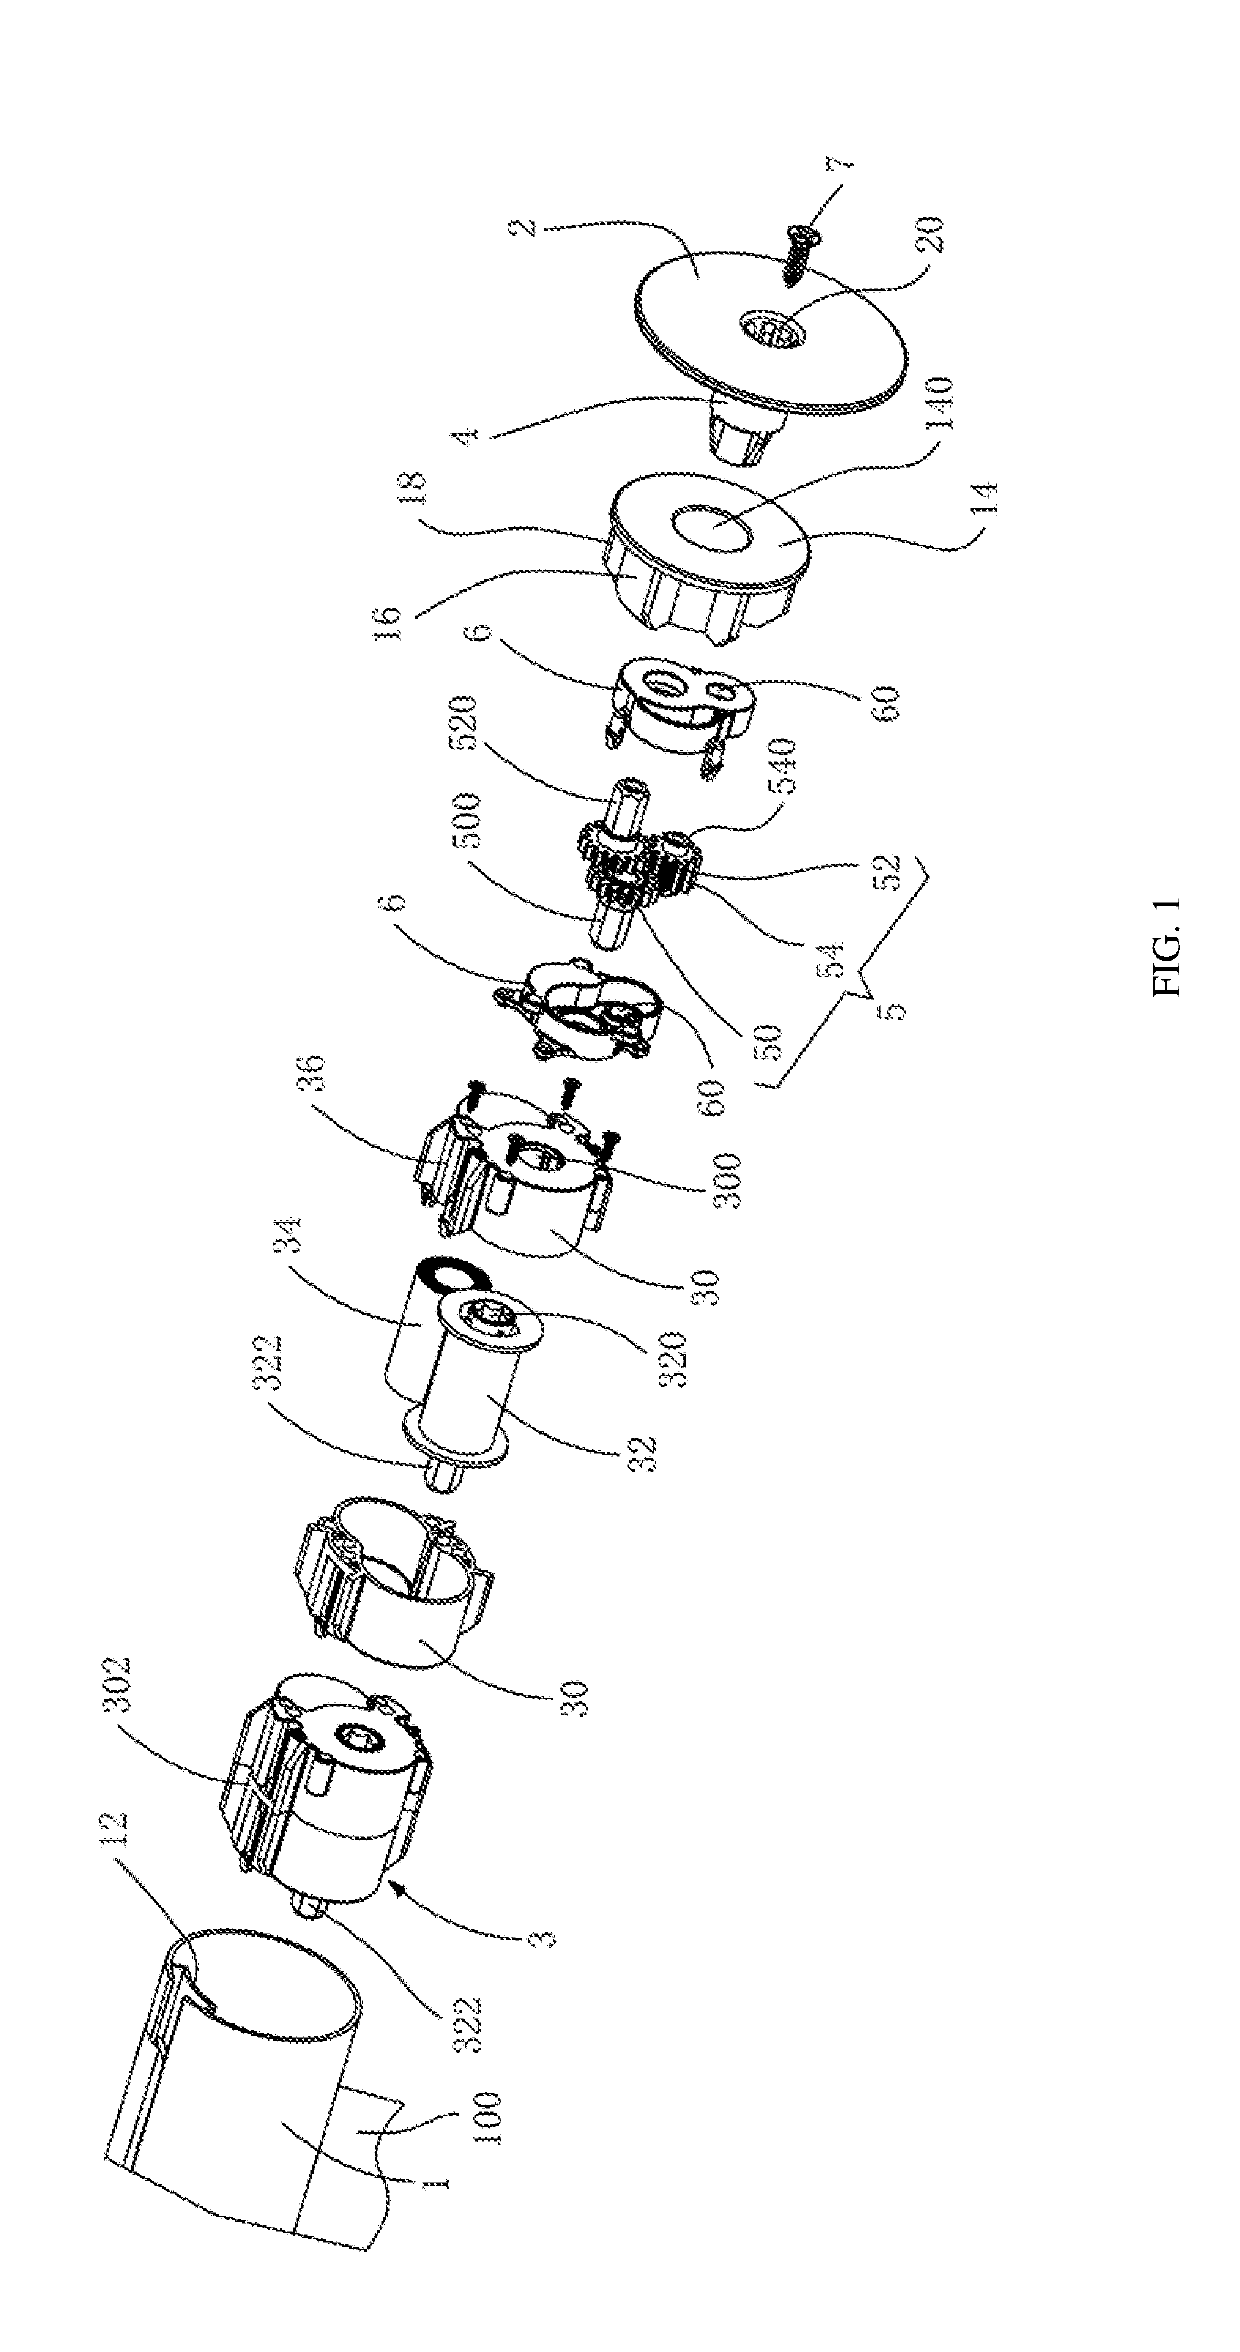 Built-in roller shade actuation device